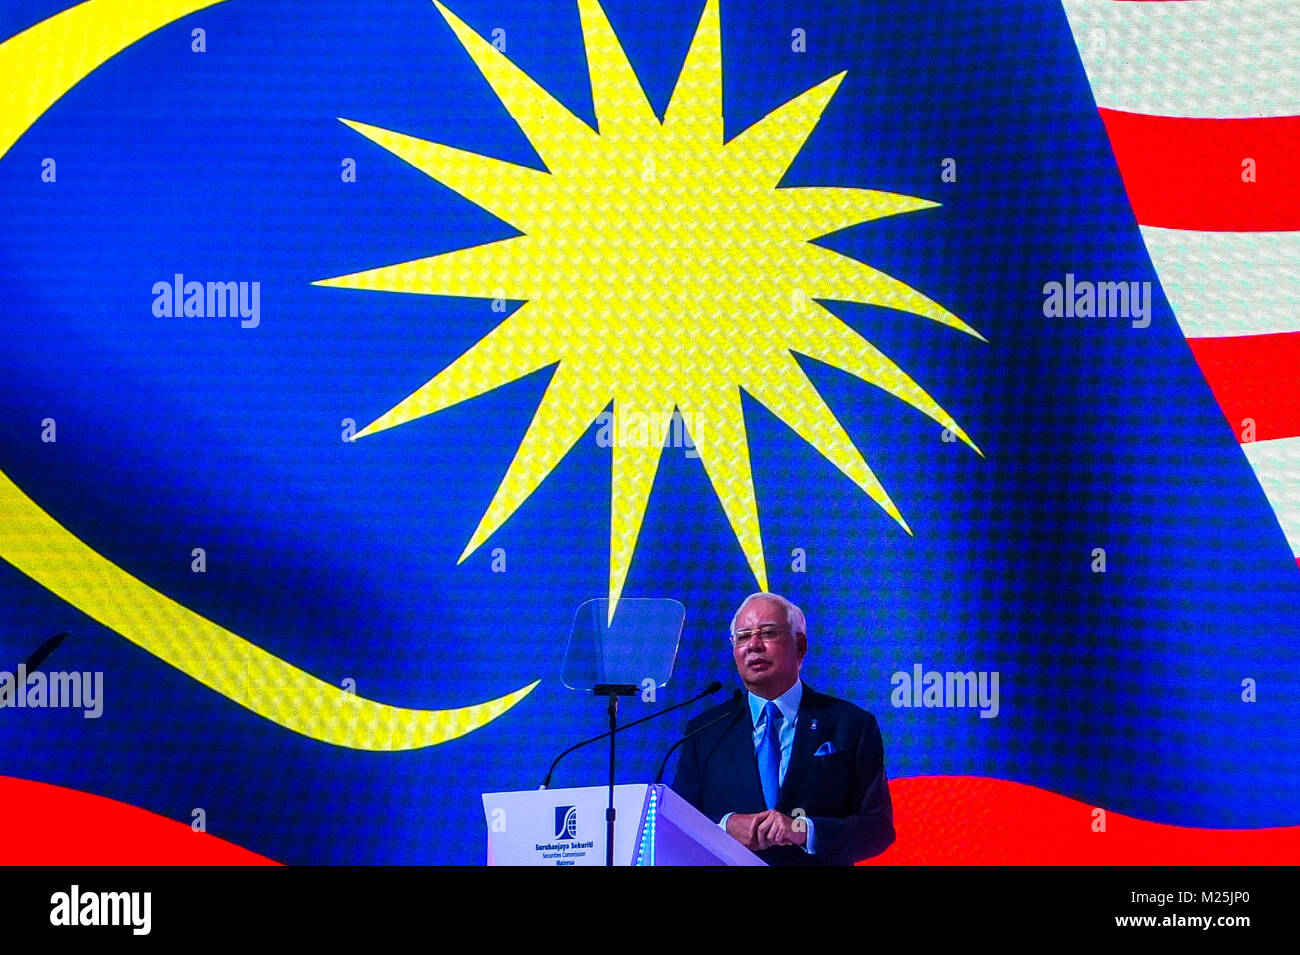 KUALA LUMPUR, MALAYSIA - FEBRUARY 06: Malaysia Prime Minister Najib Razak give a speech during World Capital Market Symposium 2018 in Kuala Lumpur on February 6, 2018. According to Najib Razak speech Malaysia has always been an example of stability and moderation, open to friendship with all, in keeping with our past as a seafaring, trading nation, a multi-ethnic. Malaysia became the first country in ASEAN to estabilish diplomatic relations with China also have signed comprehensive and strategic partnership with a number of countries, including teh United States, India, China and Japan . (Phot Stock Photo